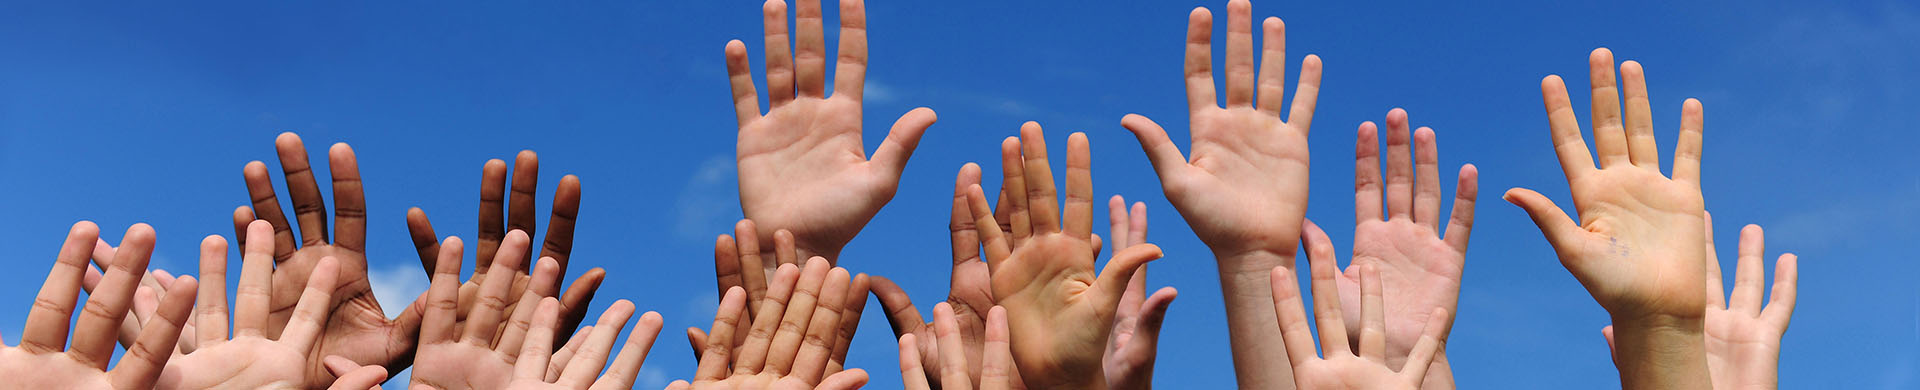 Group of Raised Hands Against a Blue Sky